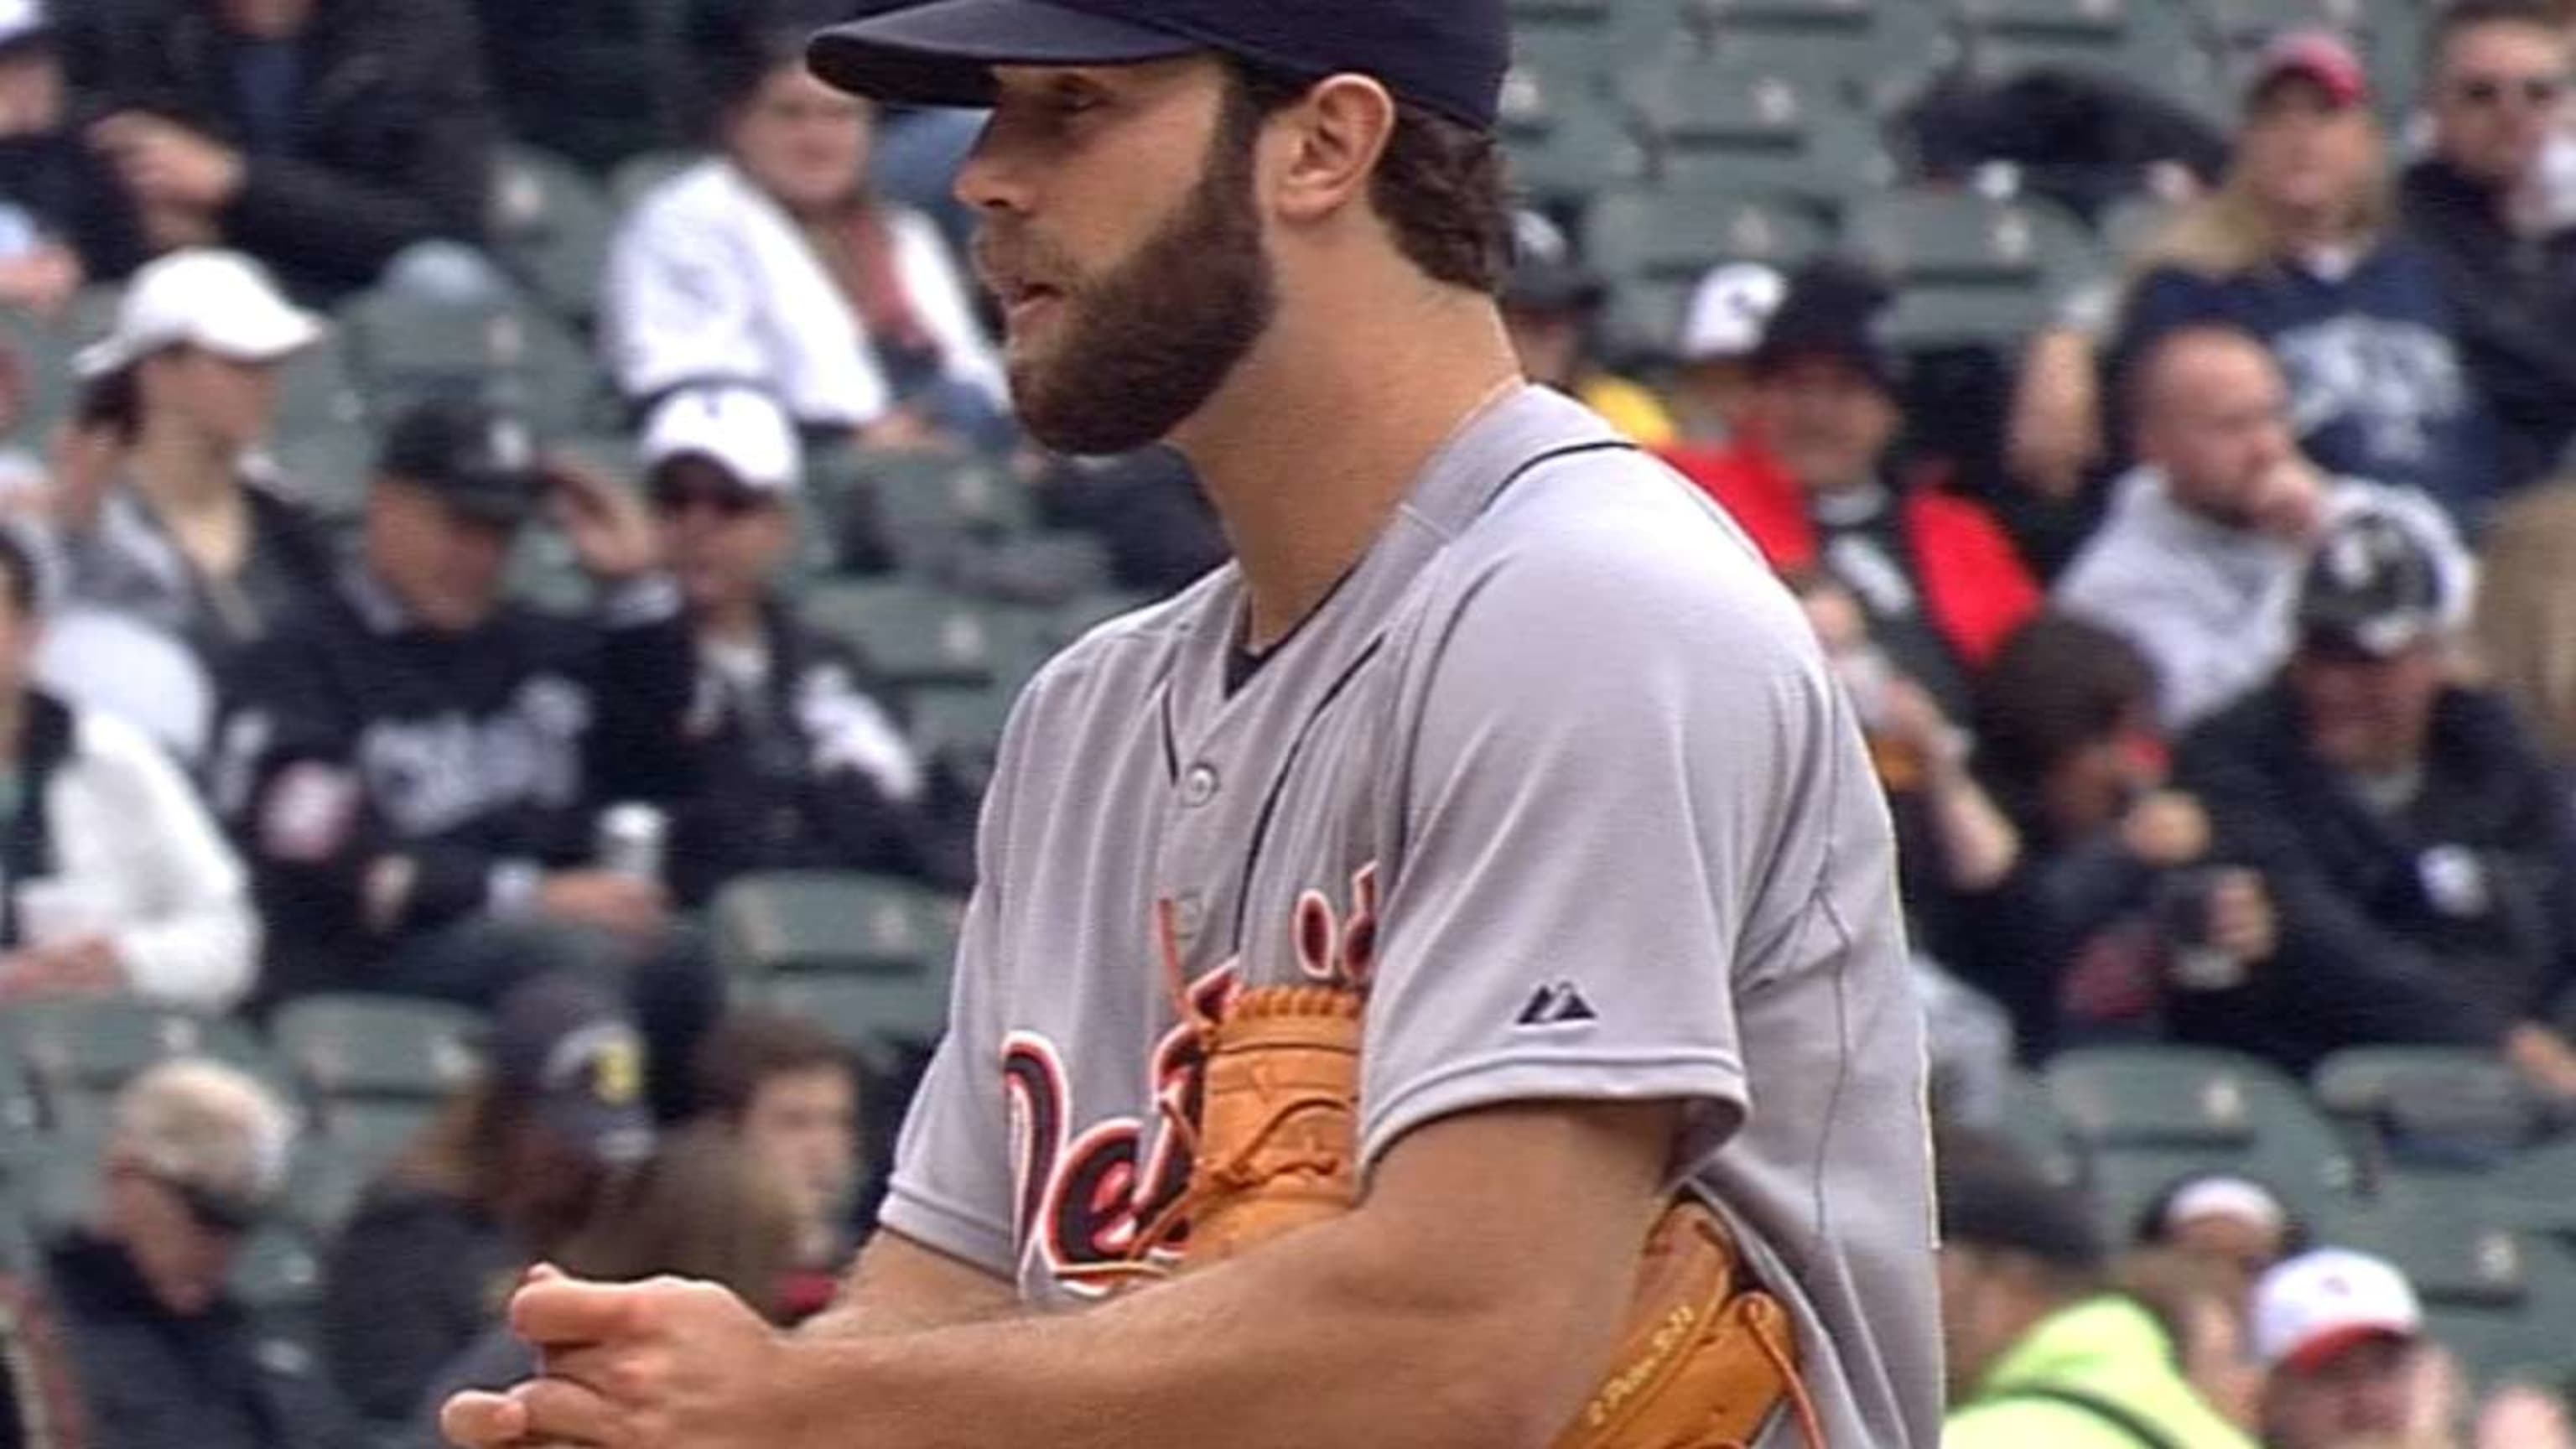 Daniel Norris announces he has thyroid cancer and needs surgery 